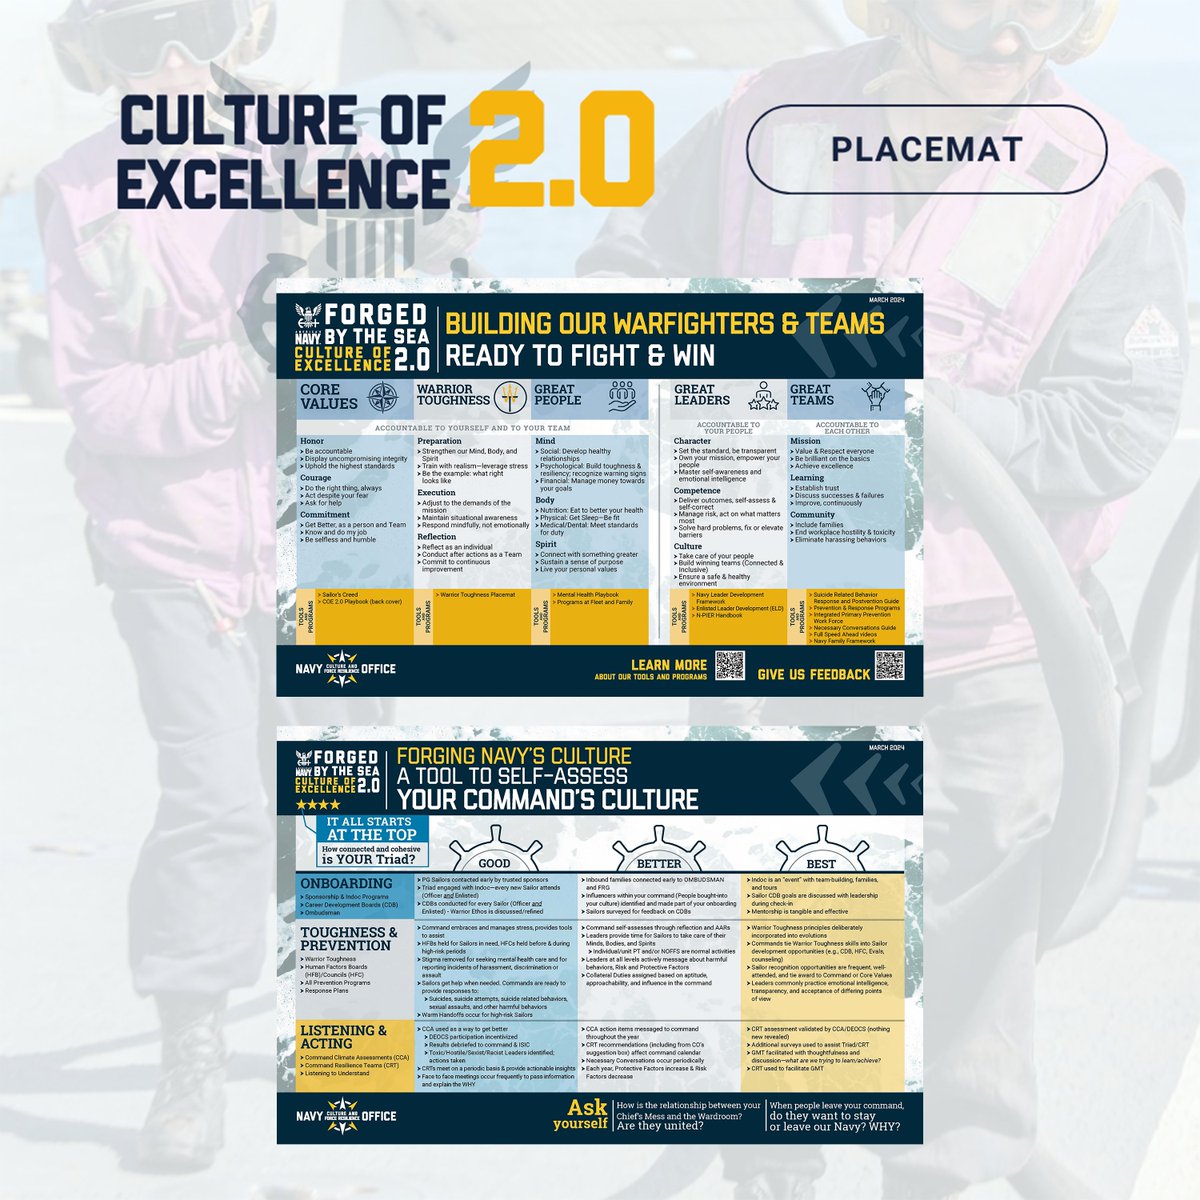 Navy leaders – Download and print the COE 2.0 Placemat and start empowering your teams today! The COE 2.0 Placemat provides leaders with a concise explanation of the foundational elements that bring COE 2.0 to life. 🔗 View and download here: bit.ly/3uYFvfP